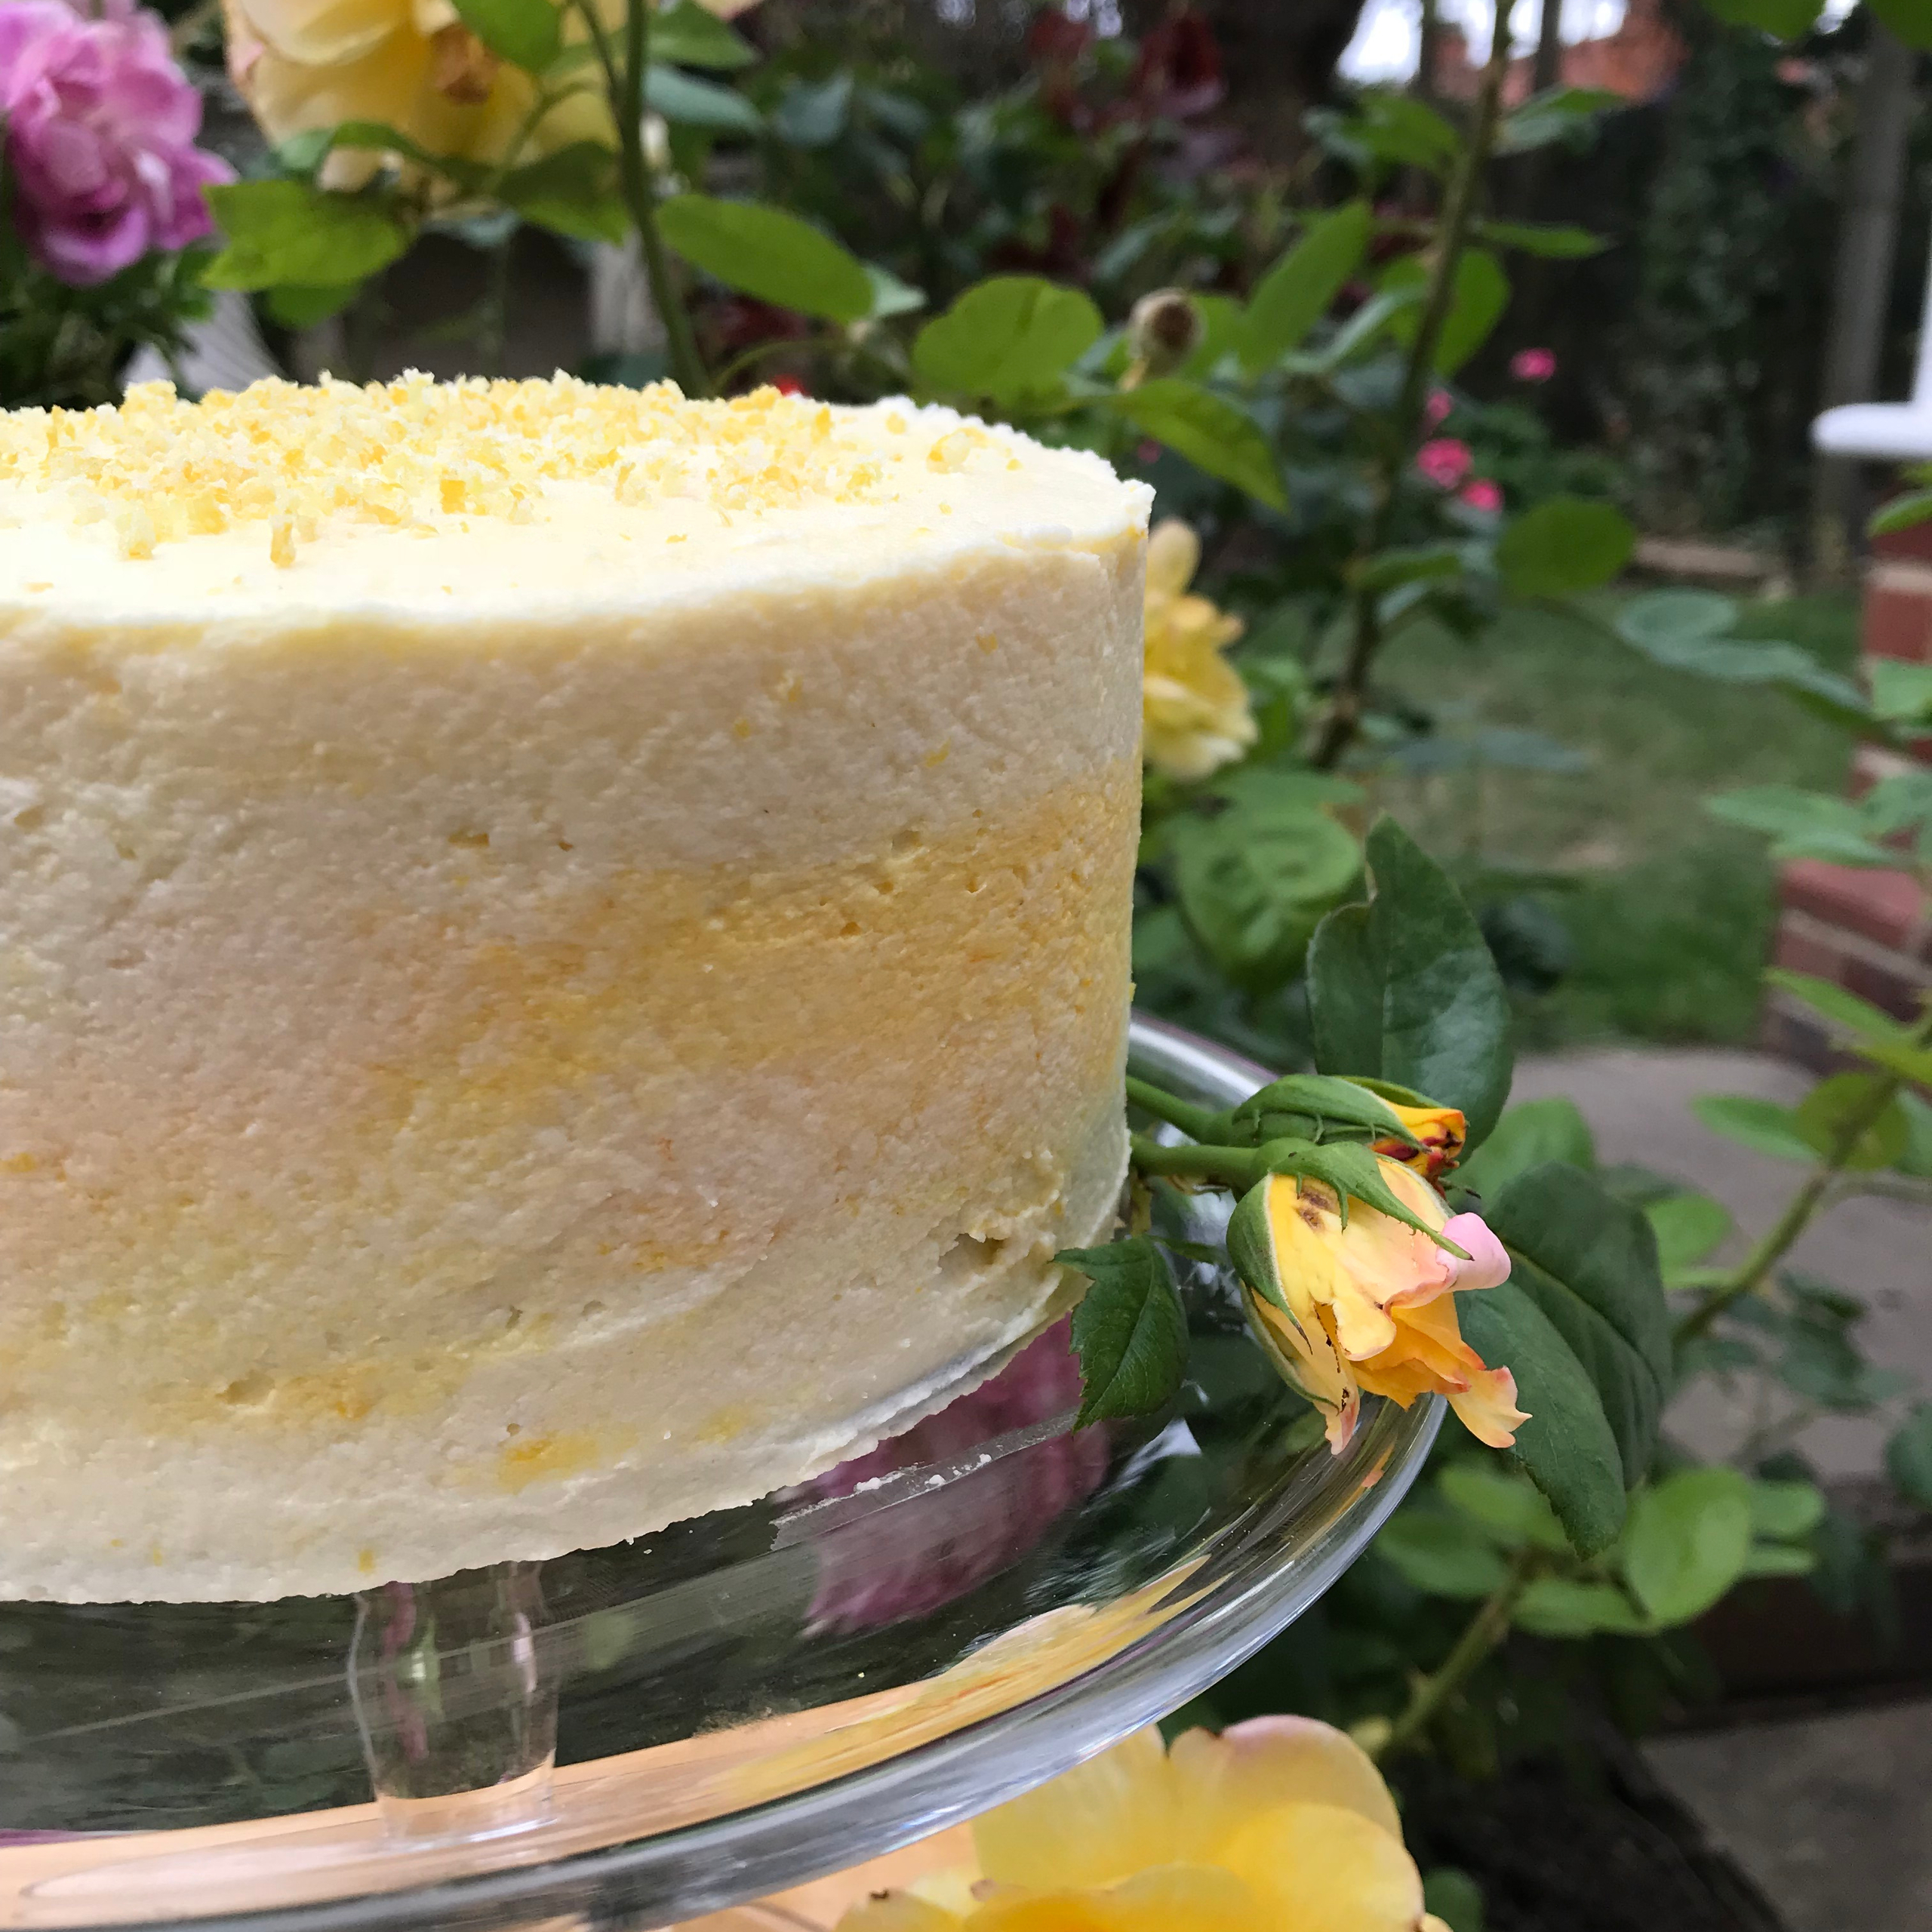 Lemon and Elderflower Cake with a not too sweet frosting